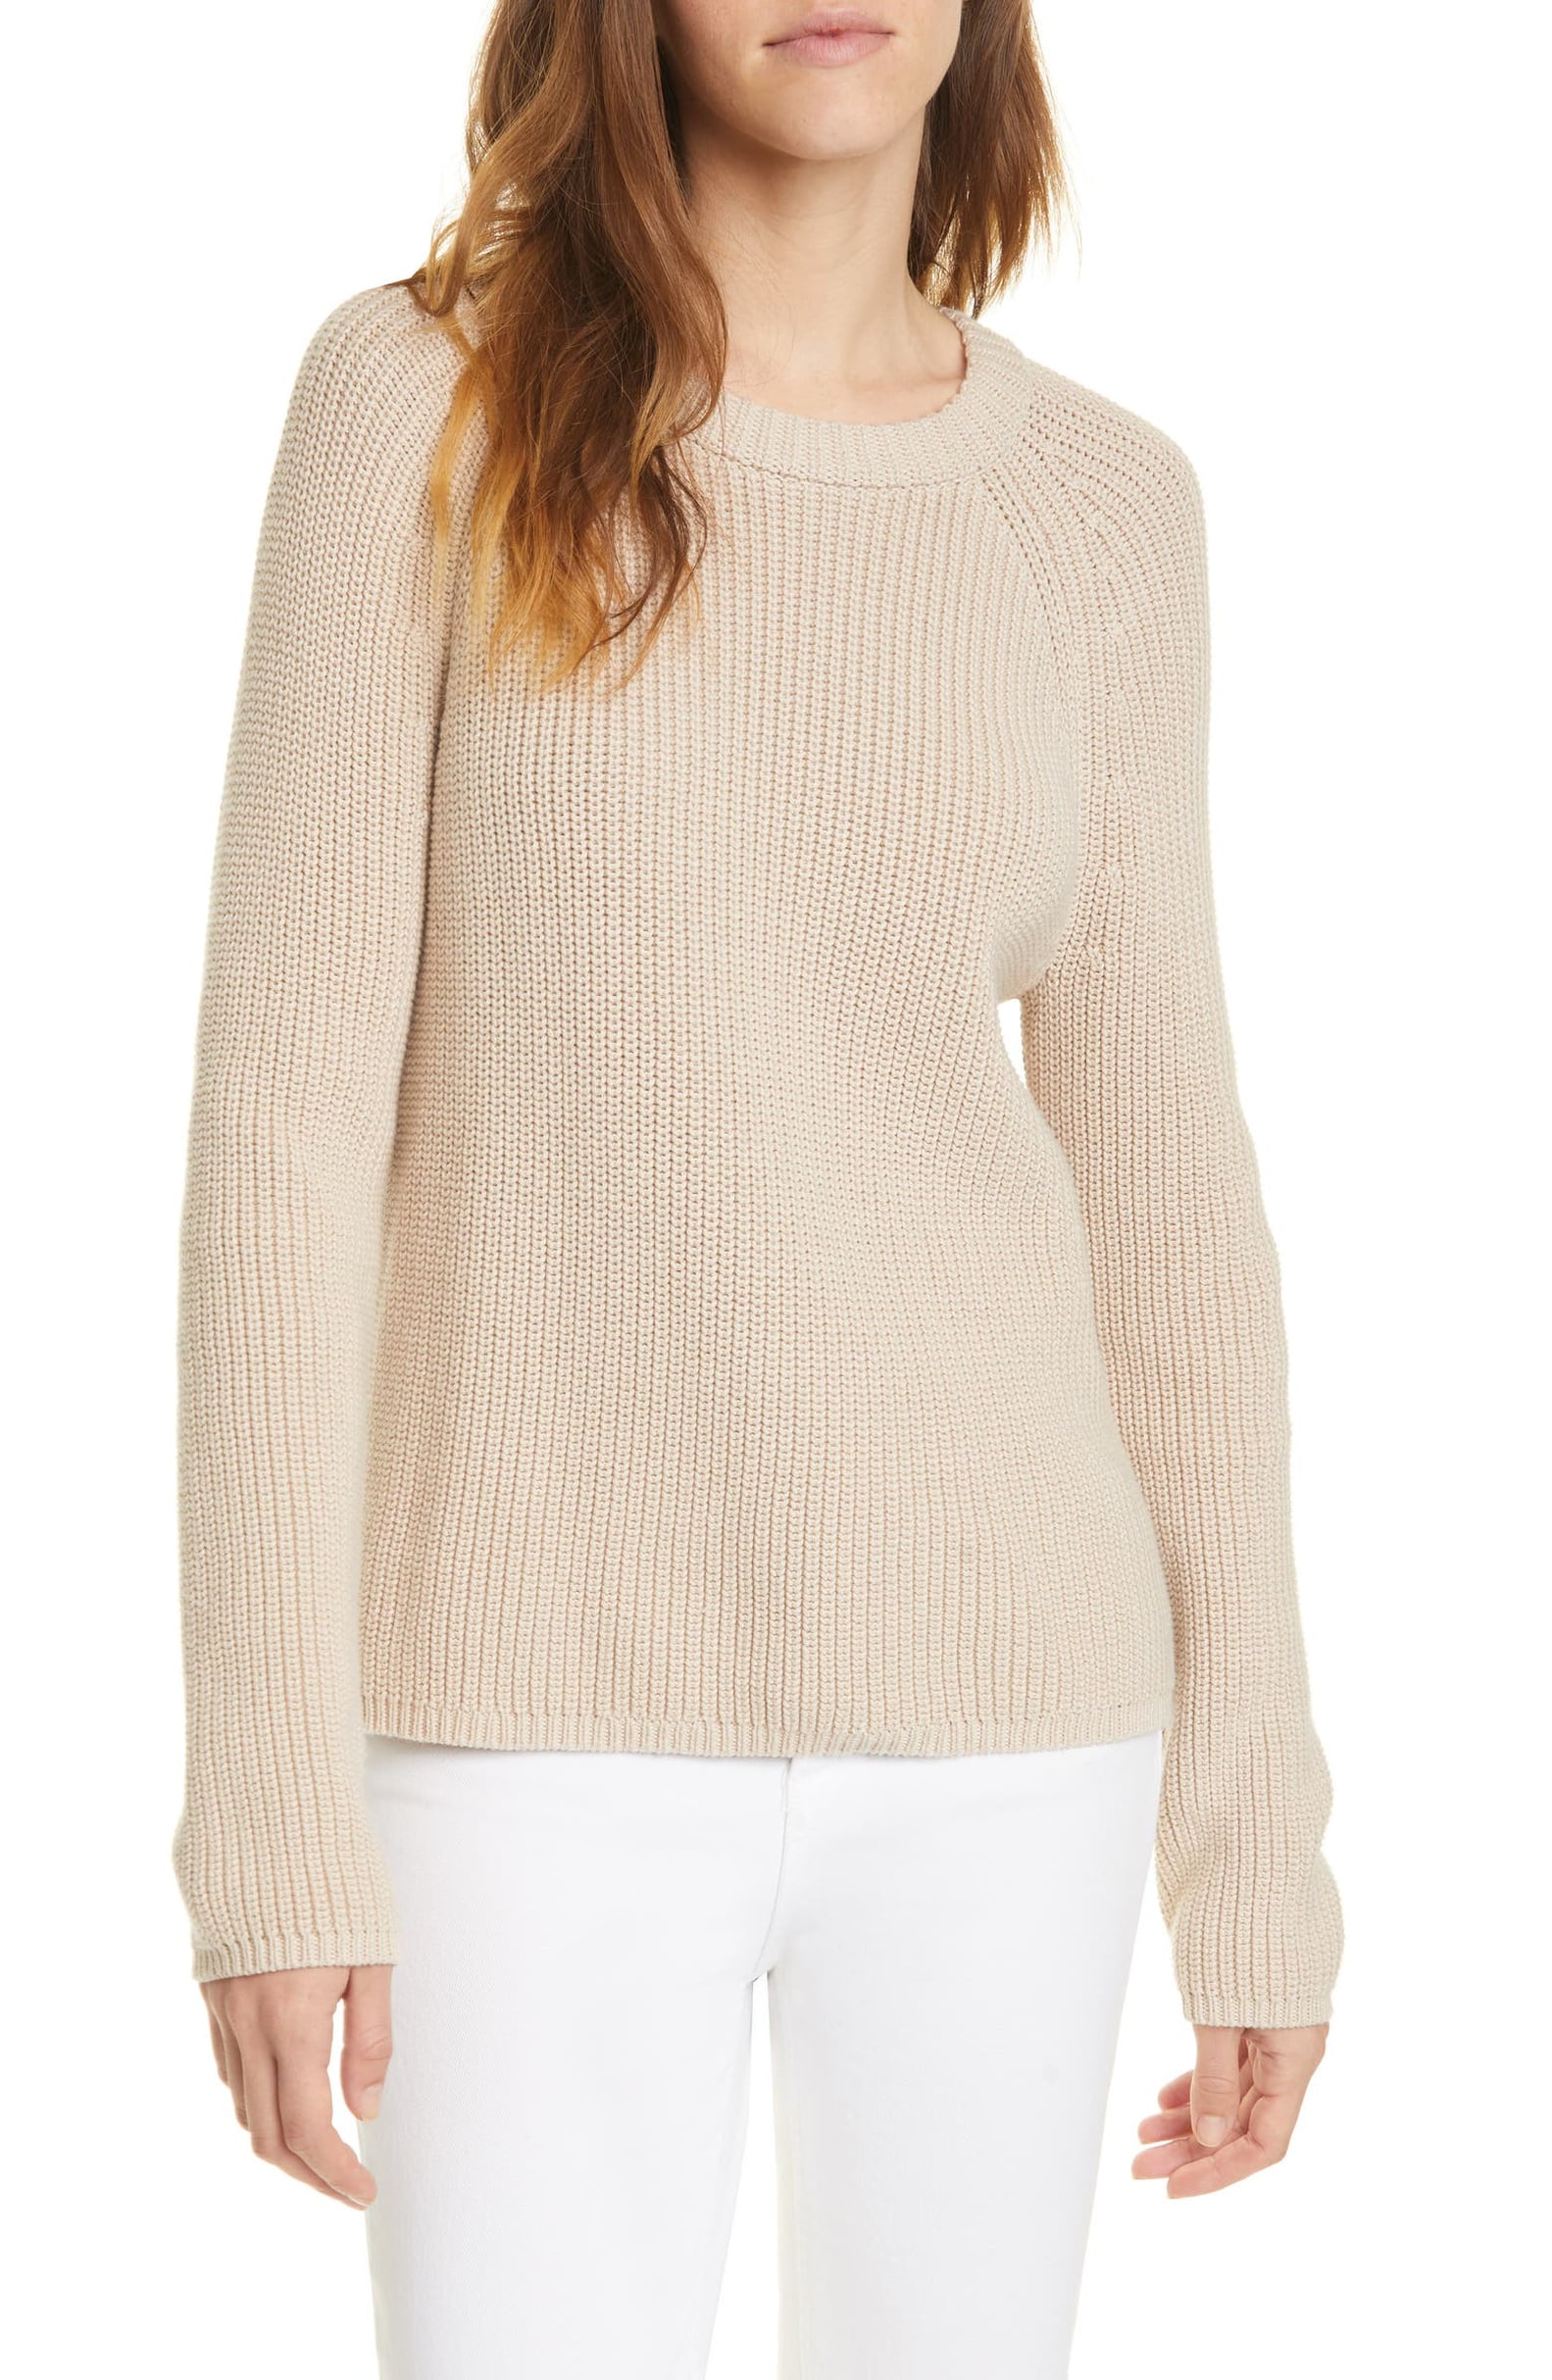 The Top-Rated Sweaters From Nordstrom | POPSUGAR Fashion